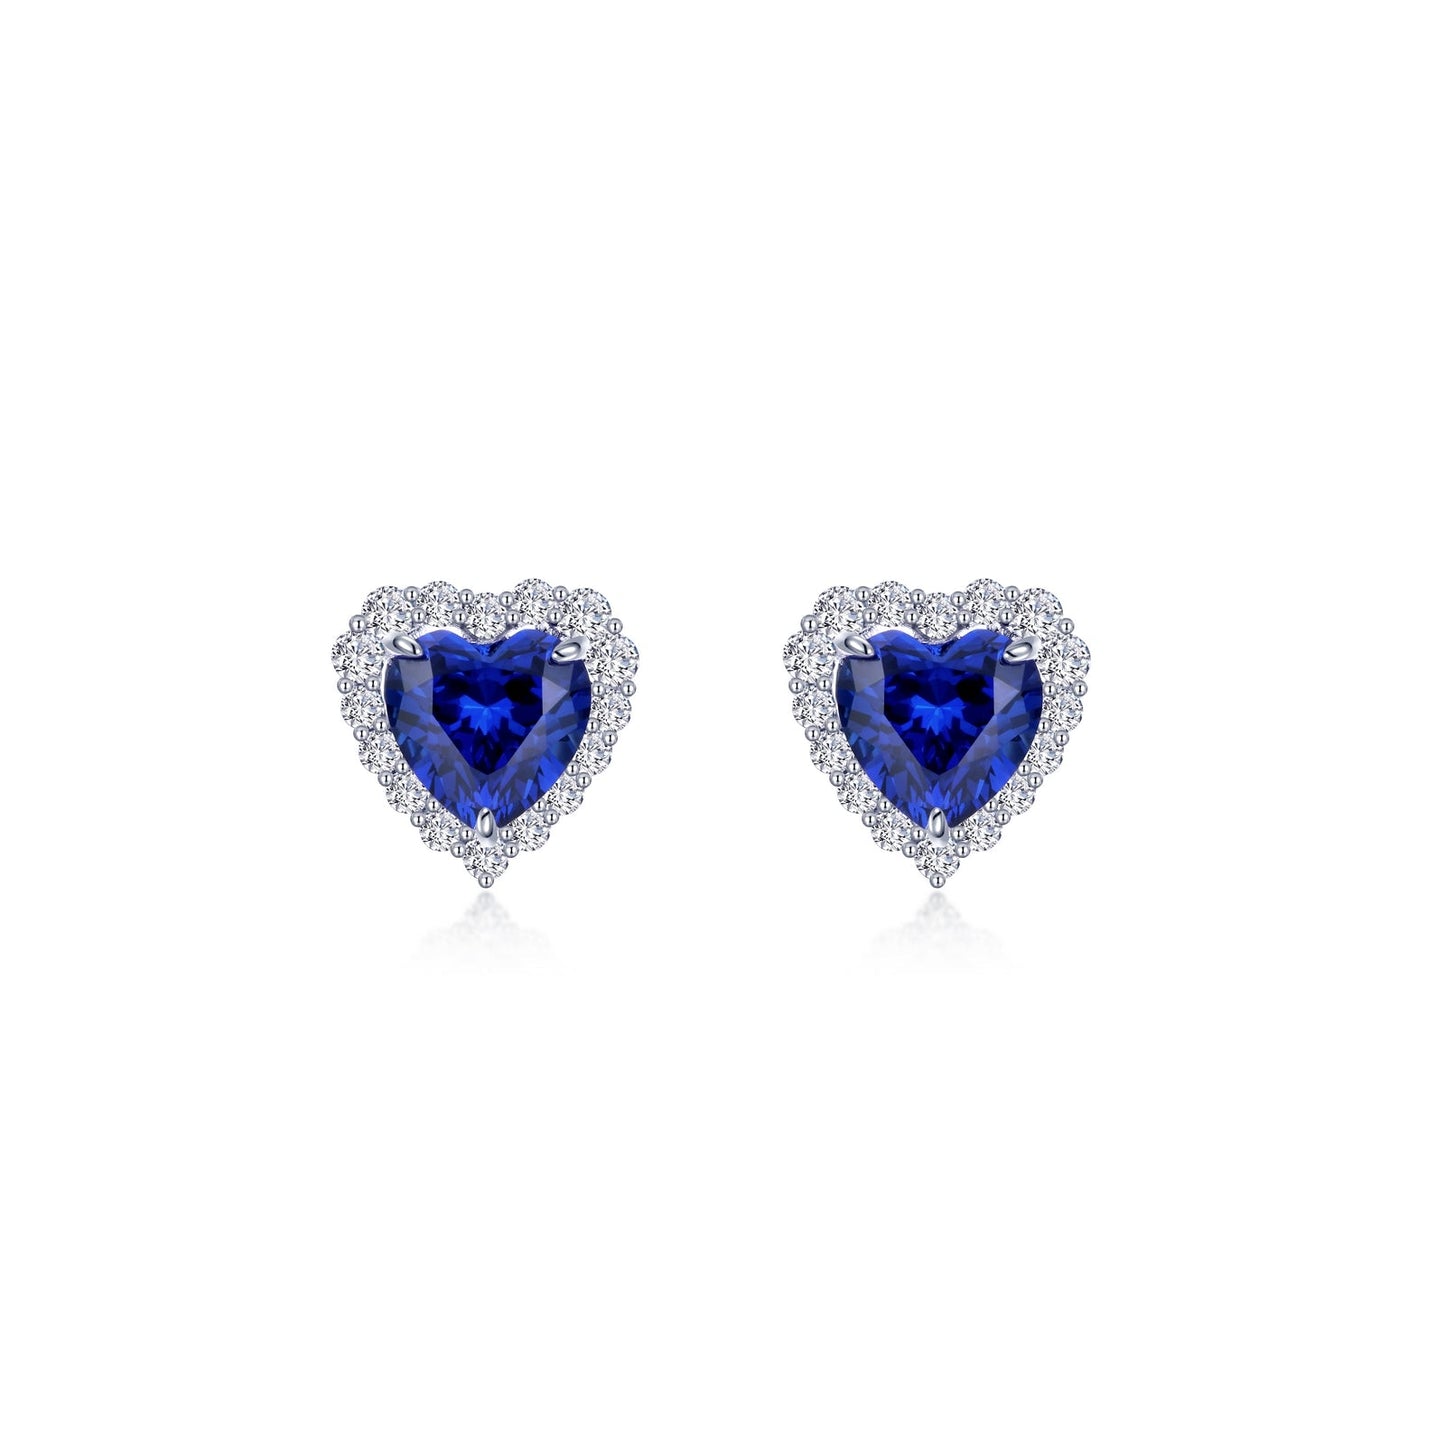 Load image into Gallery viewer, Lafonn Fancy Lab-Grown Sapphire Halo Heart Earrings Sapphire EARRINGS Platinum Appx CTW: 2.78 cts CTS Approx. 10.5mm (H) x 10.5mm (W)
